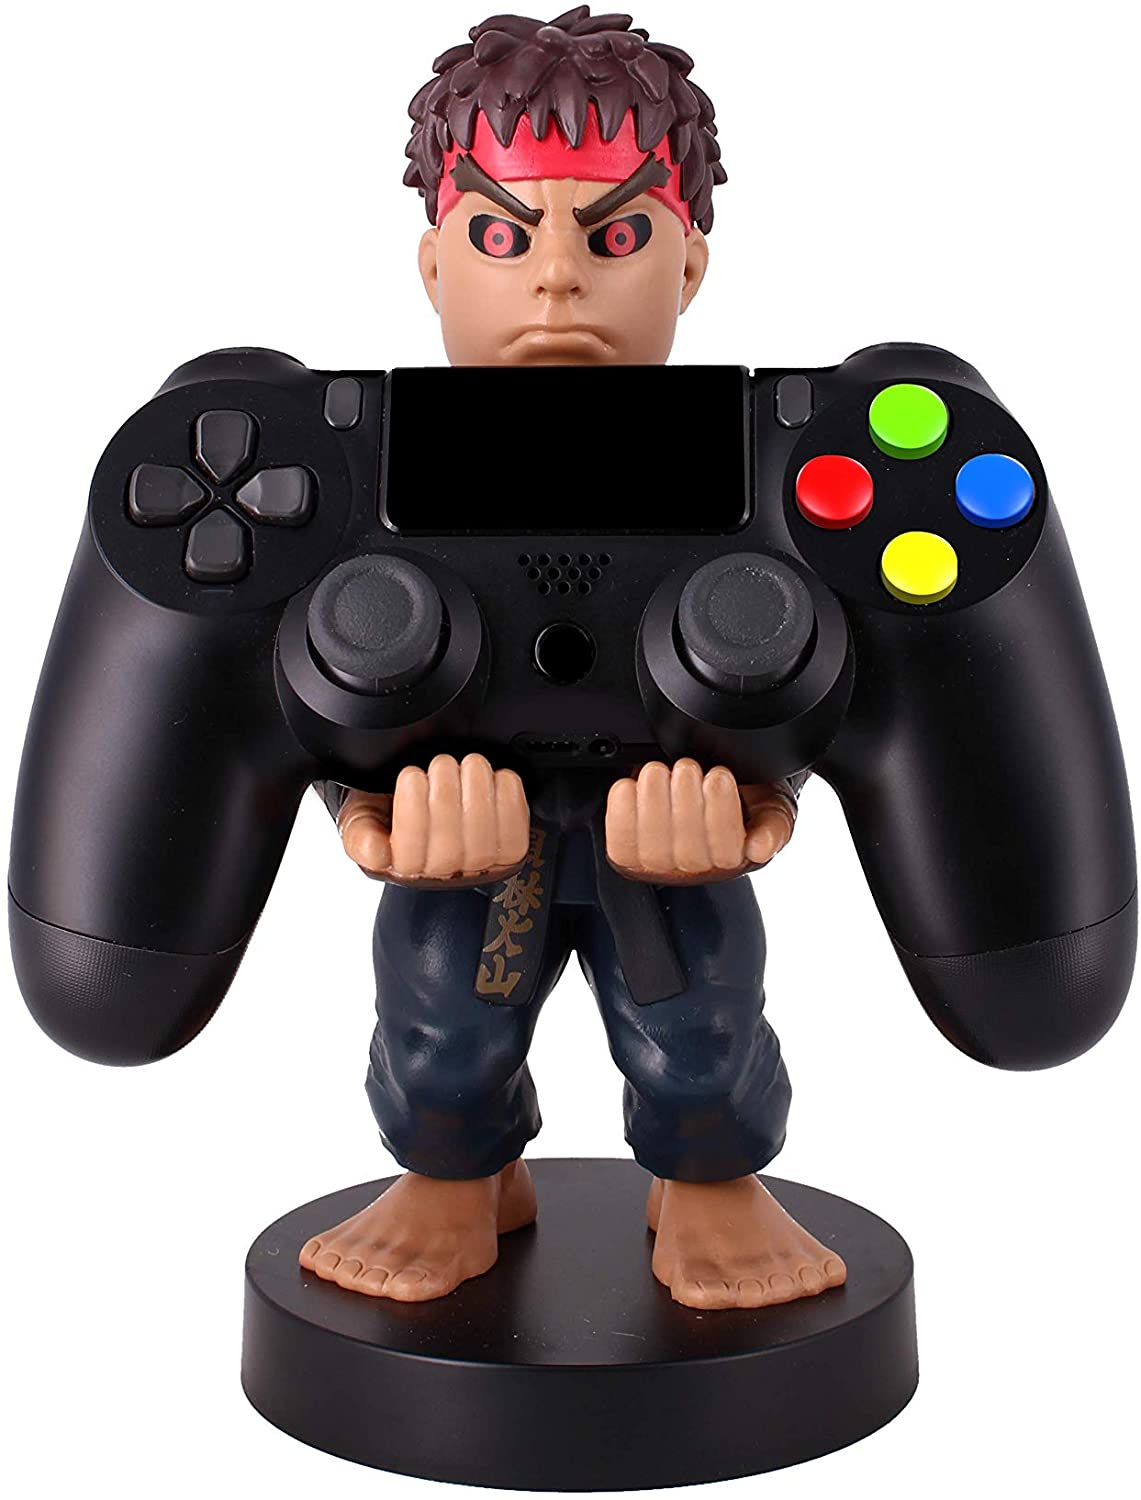 Evil Ryu Cable Guy Phone & Controller Holder - Level UpCapcomPhone & Controller Holder812169030756